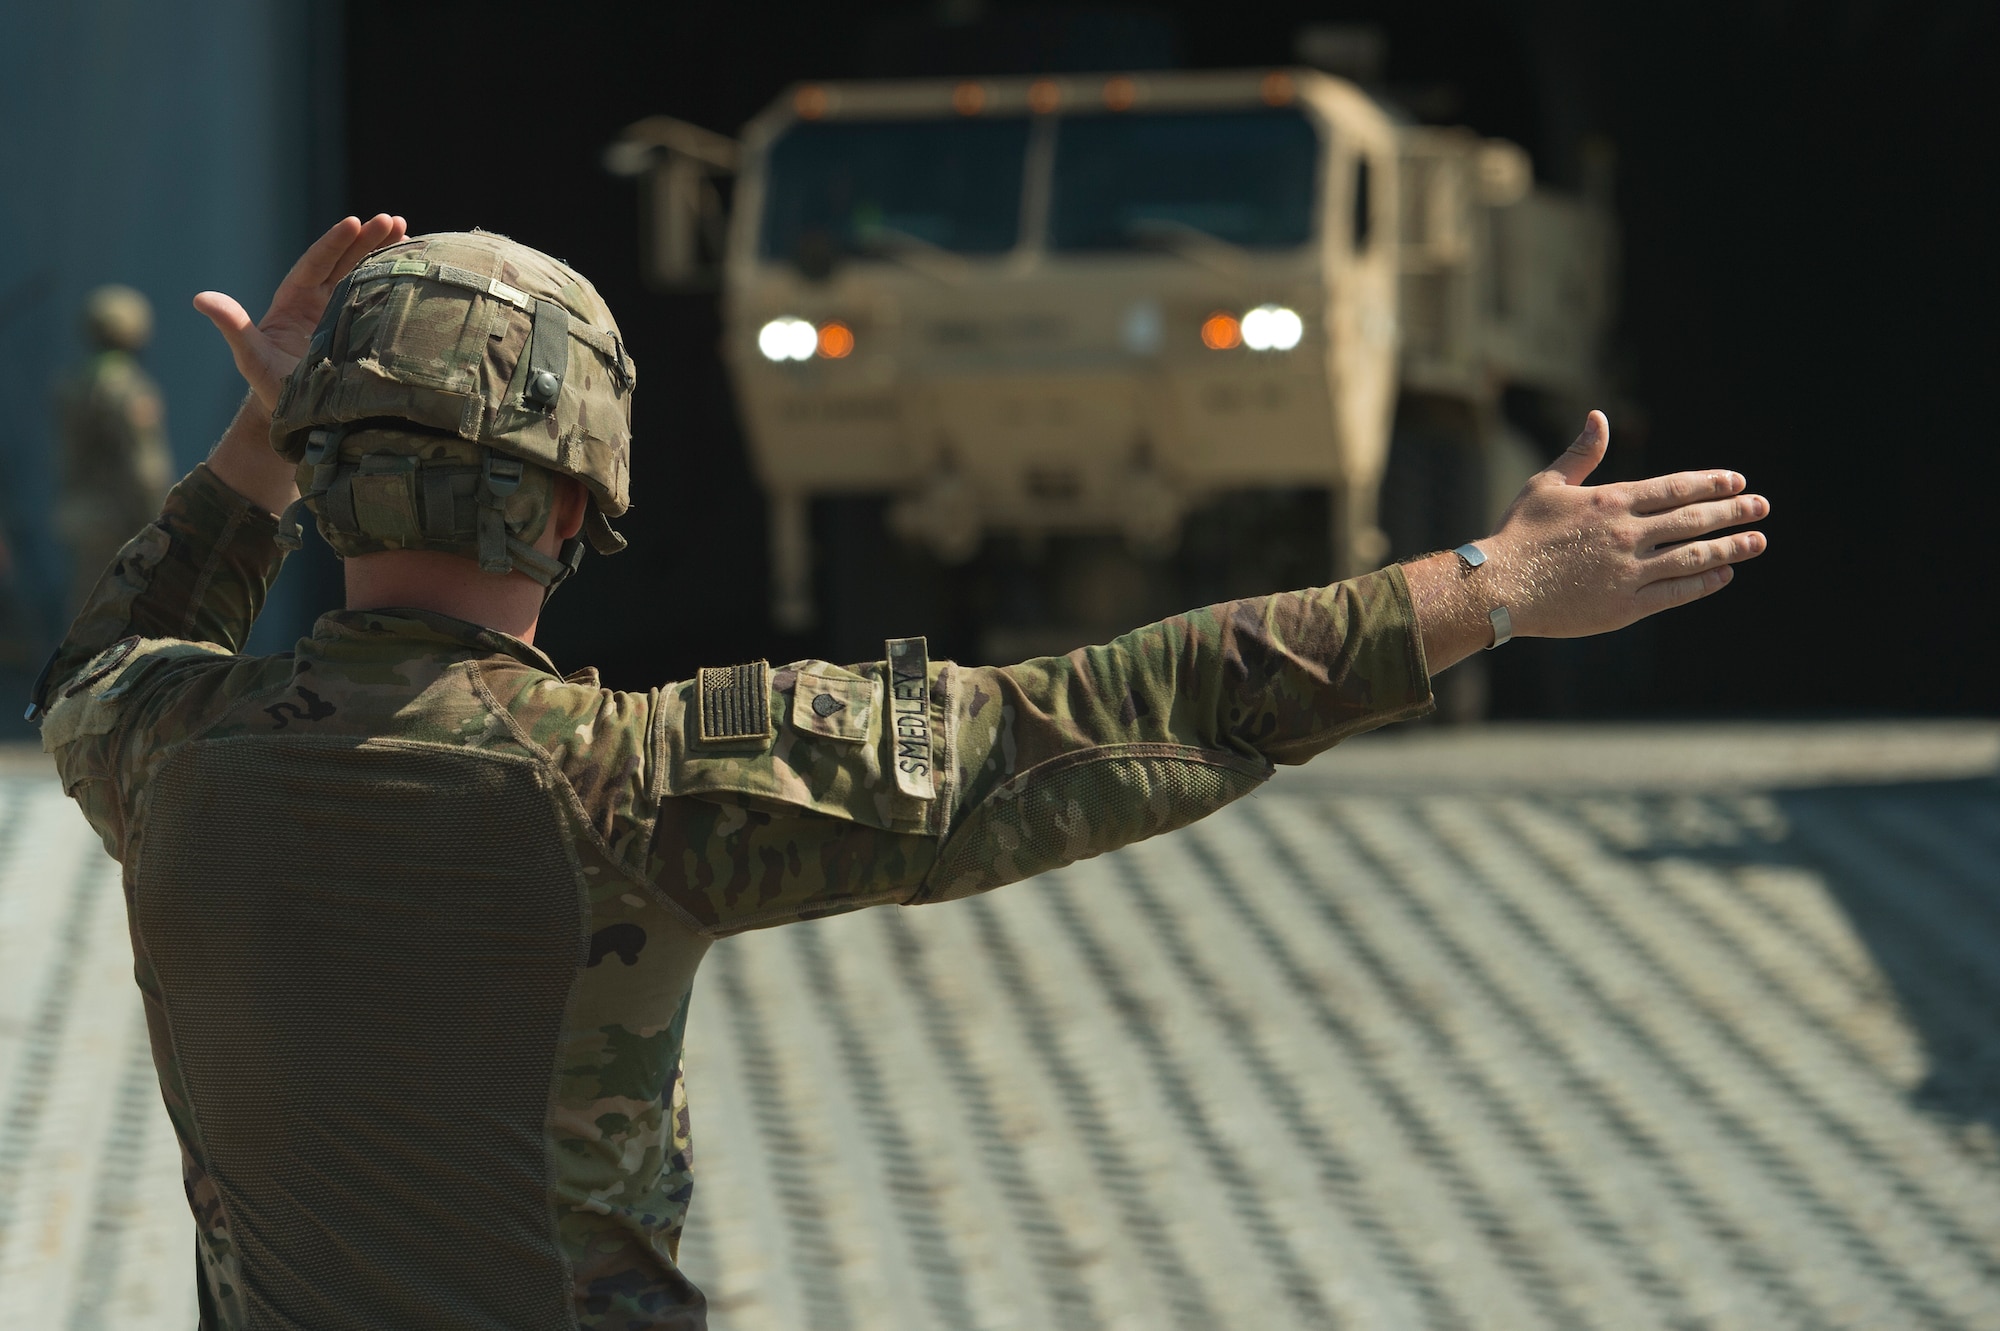 U.S. Army Spc. Robert Smedley, assigned to the 18th Field Artillery Brigade, 188th Brigade Support Battalion from Fort Bragg, N.C., directs military vehicles off Logistics Naval Vessel Cape Decision during Exercise Dragon Lifeline Aug. 7, 2019, at the Federal Law enforcement Training Center, S.C. The deployment readiness exercise combined the capabilities of service members from Fort Bragg, N.C., Joint Base Charleston, S.C., and Joint Base Langley-Eustis, Va., focusing on the rapid deployment of equipment, vehicles and personnel. Participants shared knowledge and tested their efficiency in moving assets by air, land, rail and sea during the training event. The annual exercise is just one of the critical readiness exercises the DOD conducts to maintain a lethal and ready force. (U.S. Air Force photo by Tech. Sgt. Christopher Hubenthal)